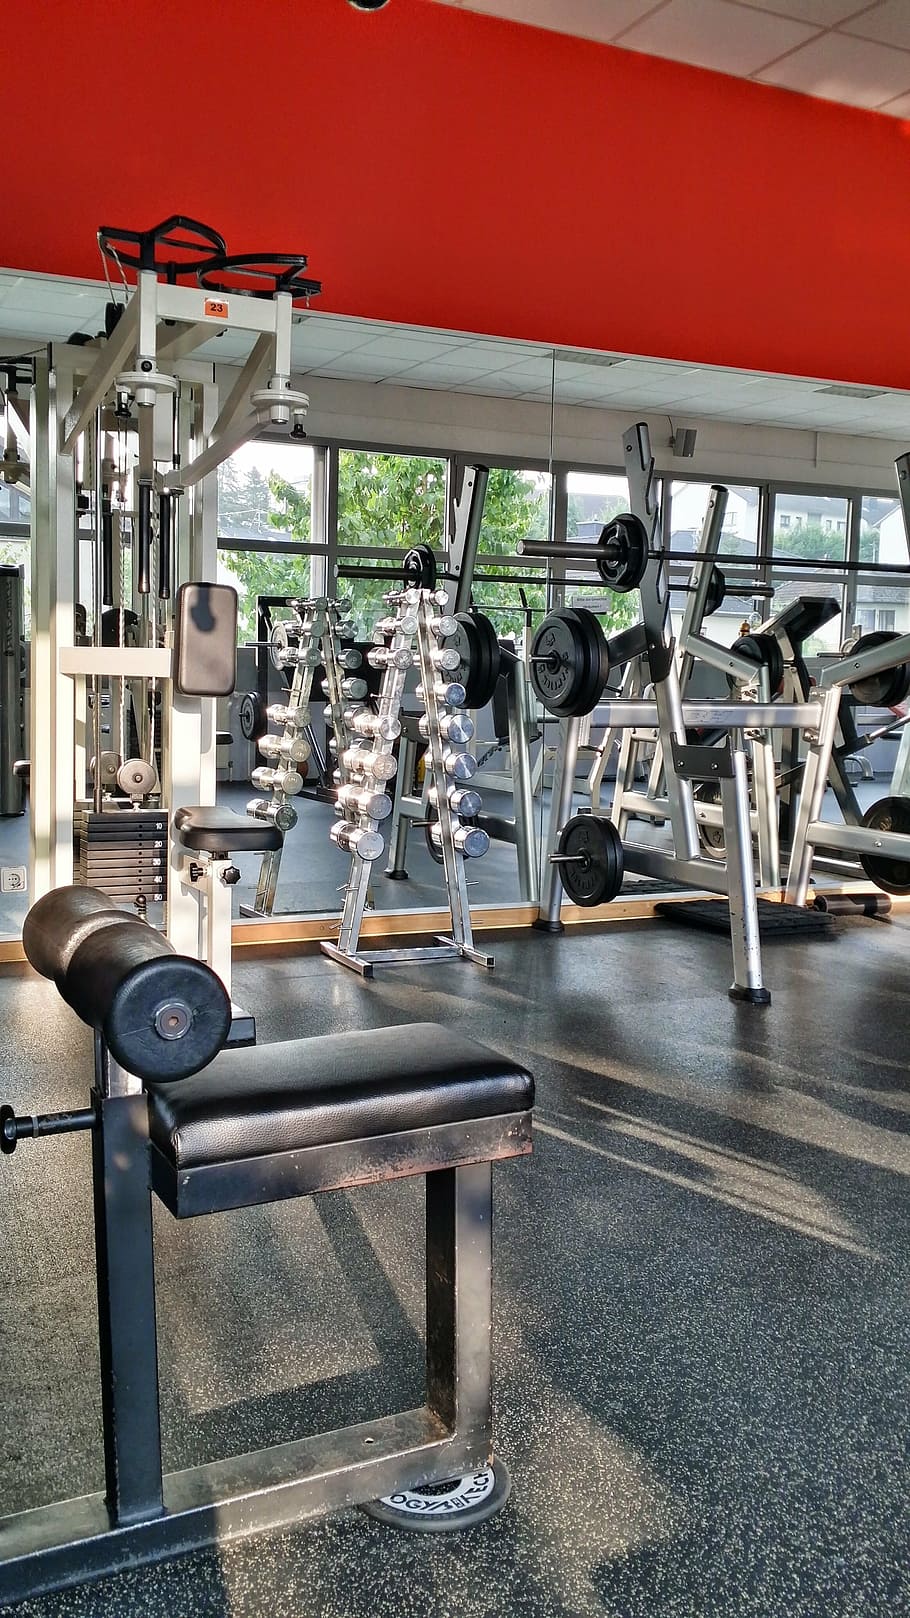 gym equipment, inside, room, training, sport, fit, sporty, fitness, fitness room, weight lifting